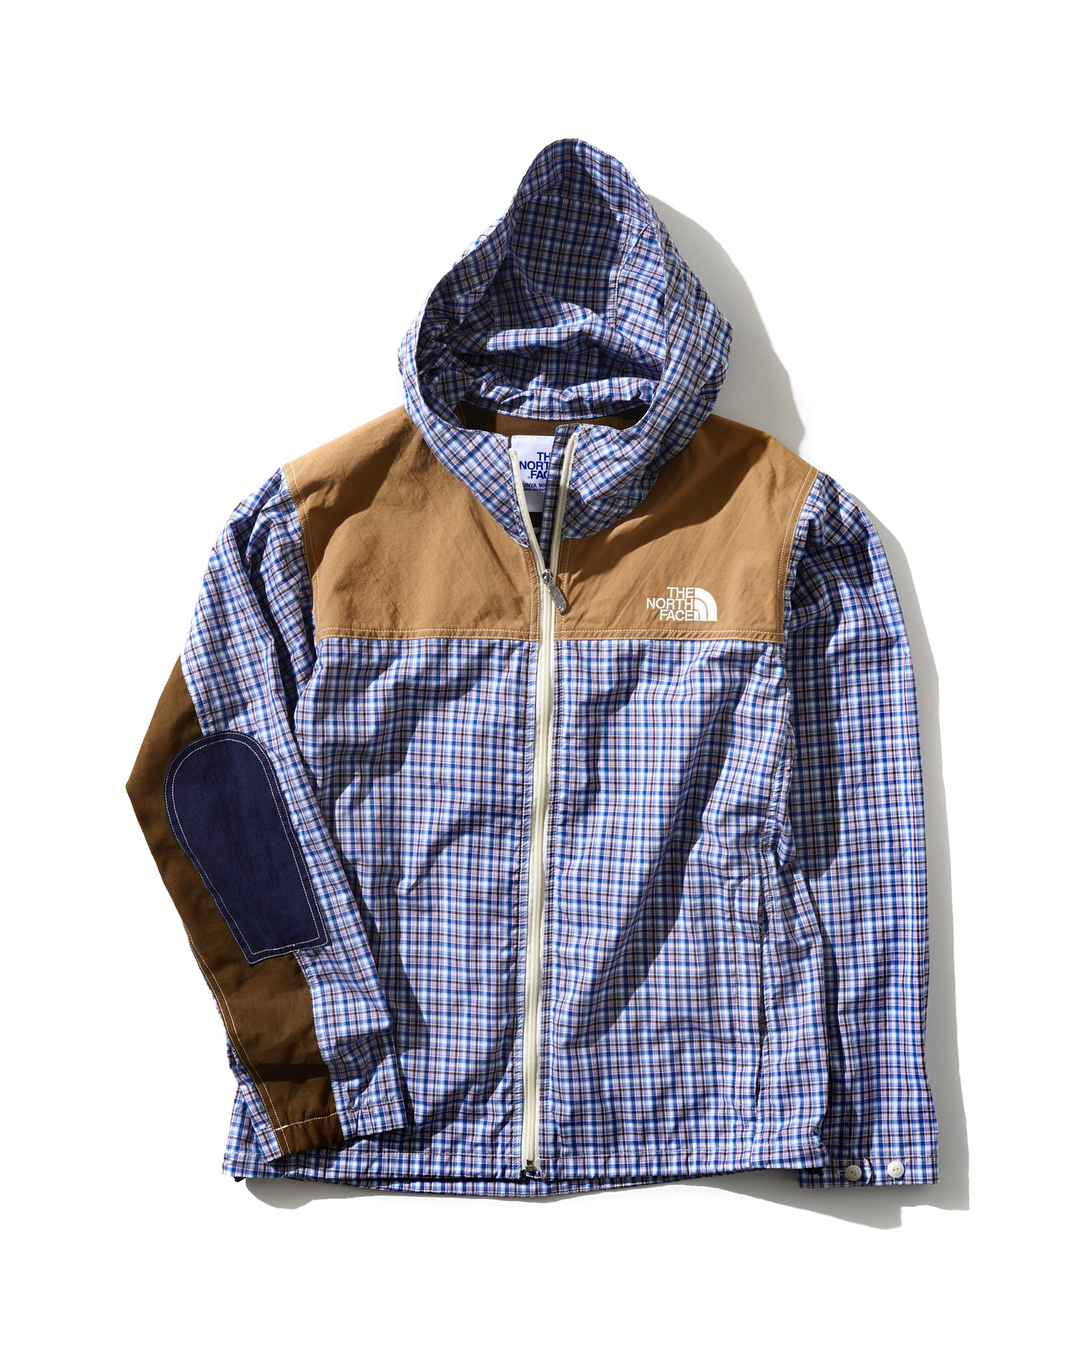 Junya Watanabe MAN and The North Face reveals two new Spring